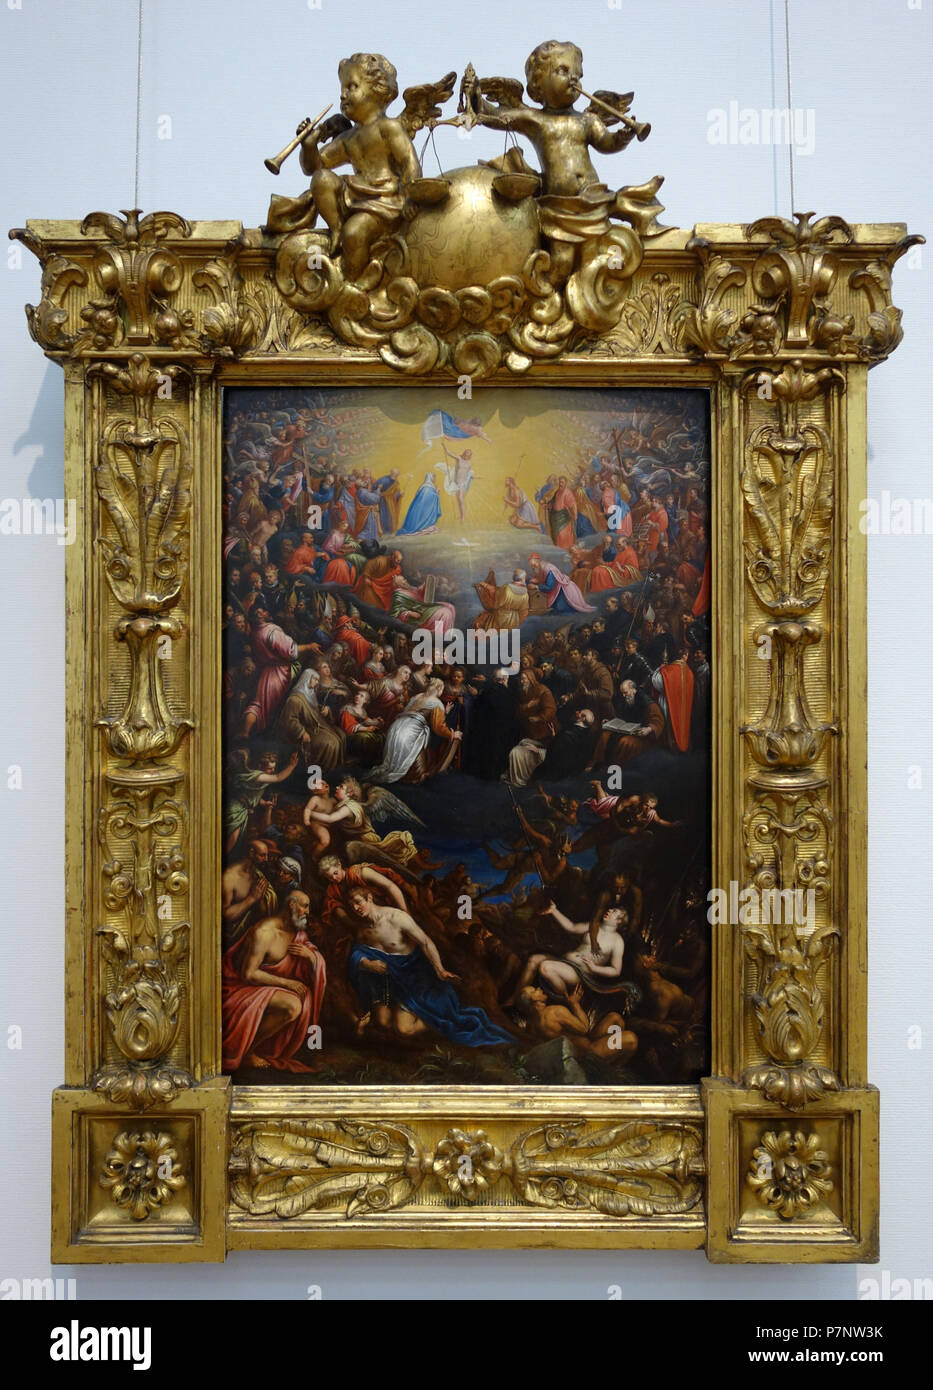 N/A. N/A 370 The Last Judgement by Leandro da Ponte, called Leandro Bassano, c. 1595-1596, oil on panel - National Museum of Western Art, Tokyo - DSC08149 Stock Photo